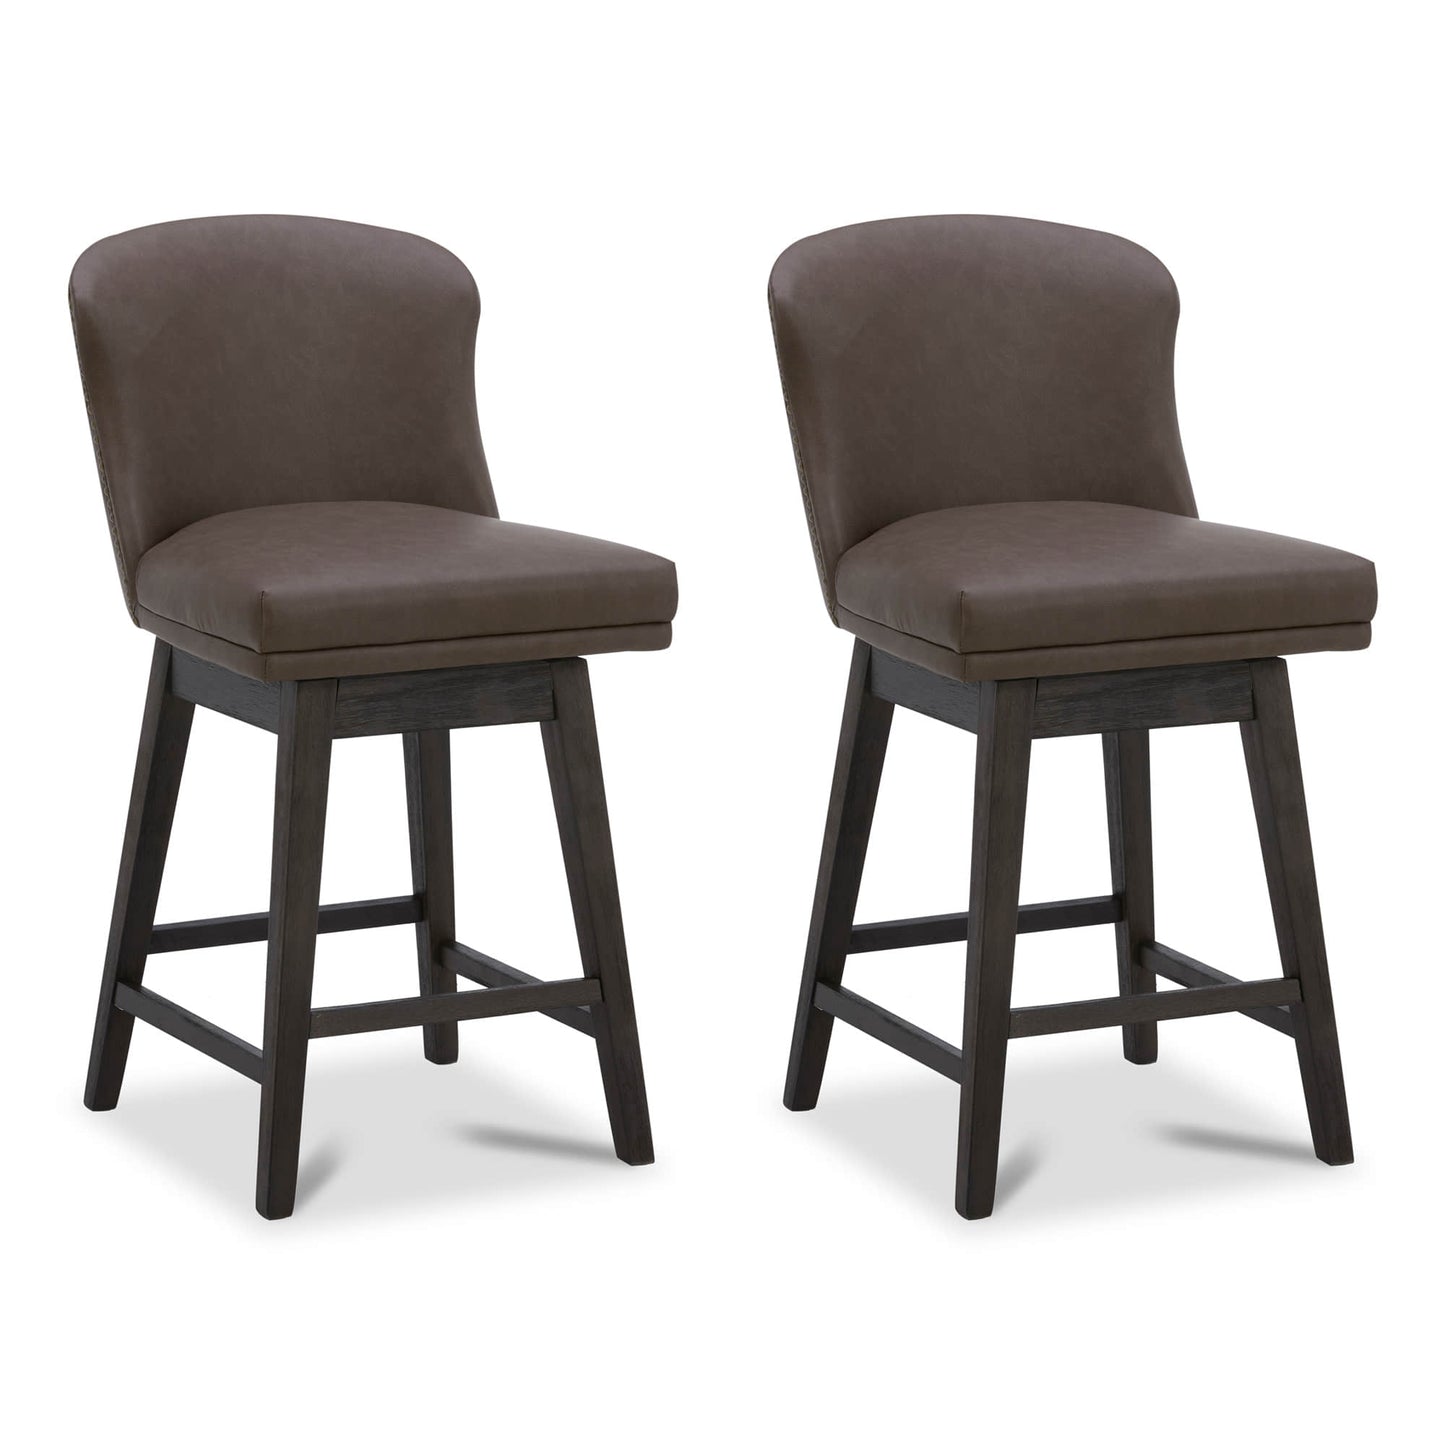 CHITA LIVING-Avery Swivel Counter Stool ( Set of 2)-Counter Stools-Faux Leather-Chocolate-